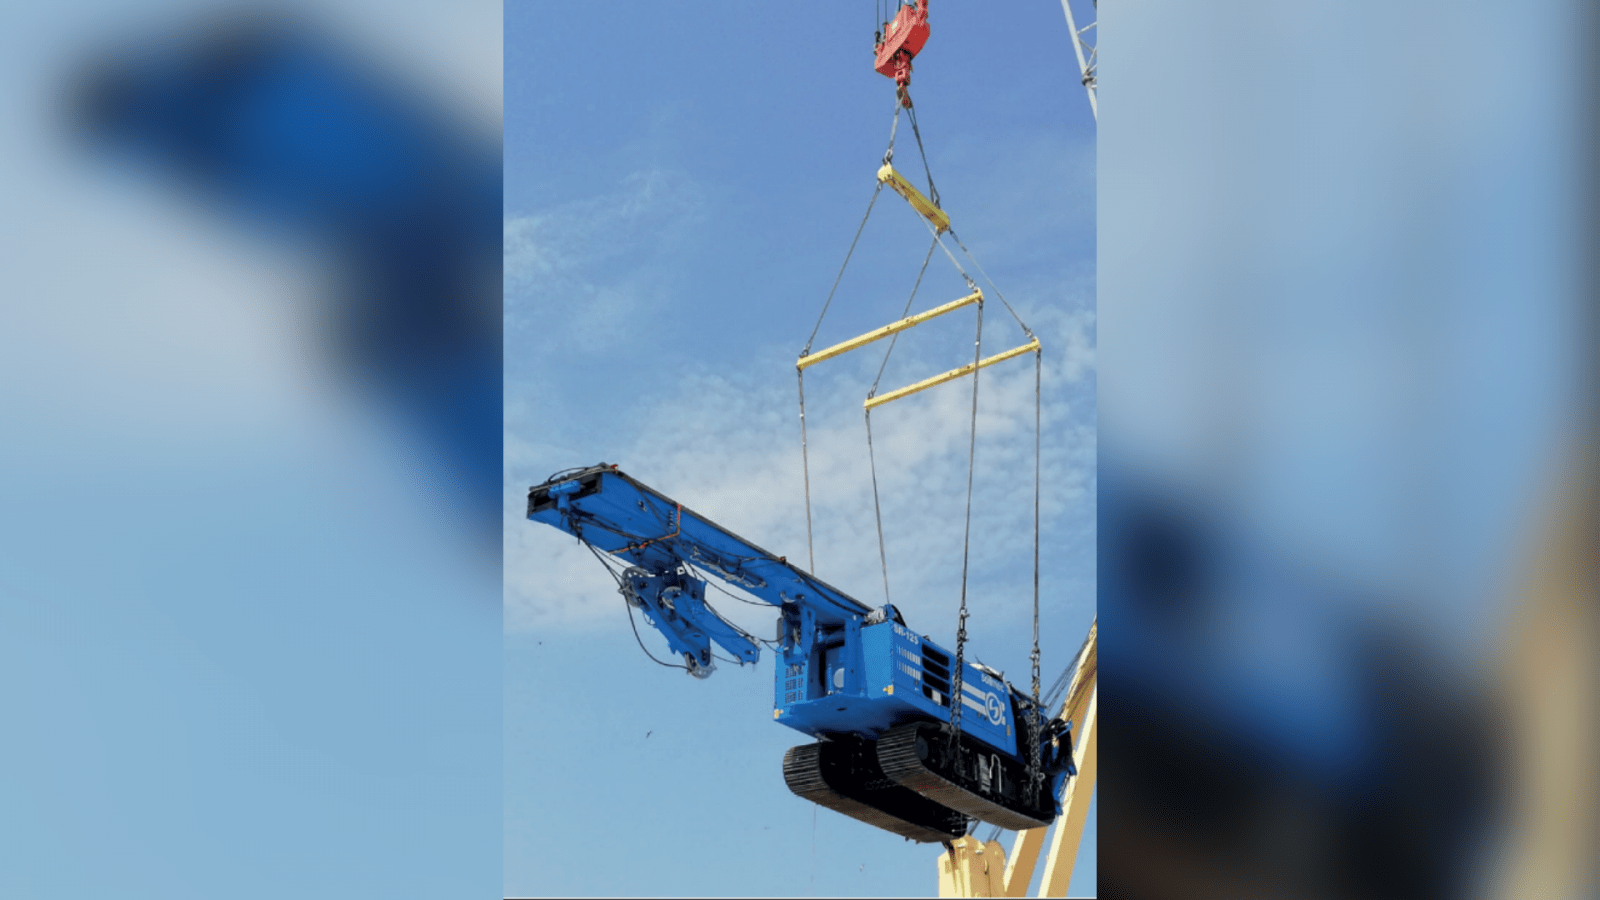 FOCUS OF THE PROJECT   Shipment of three tracked cranes, weighting 120 tons each, and their accessories from Ravenna Port to a construction site in Rooppur, Bangladesh.